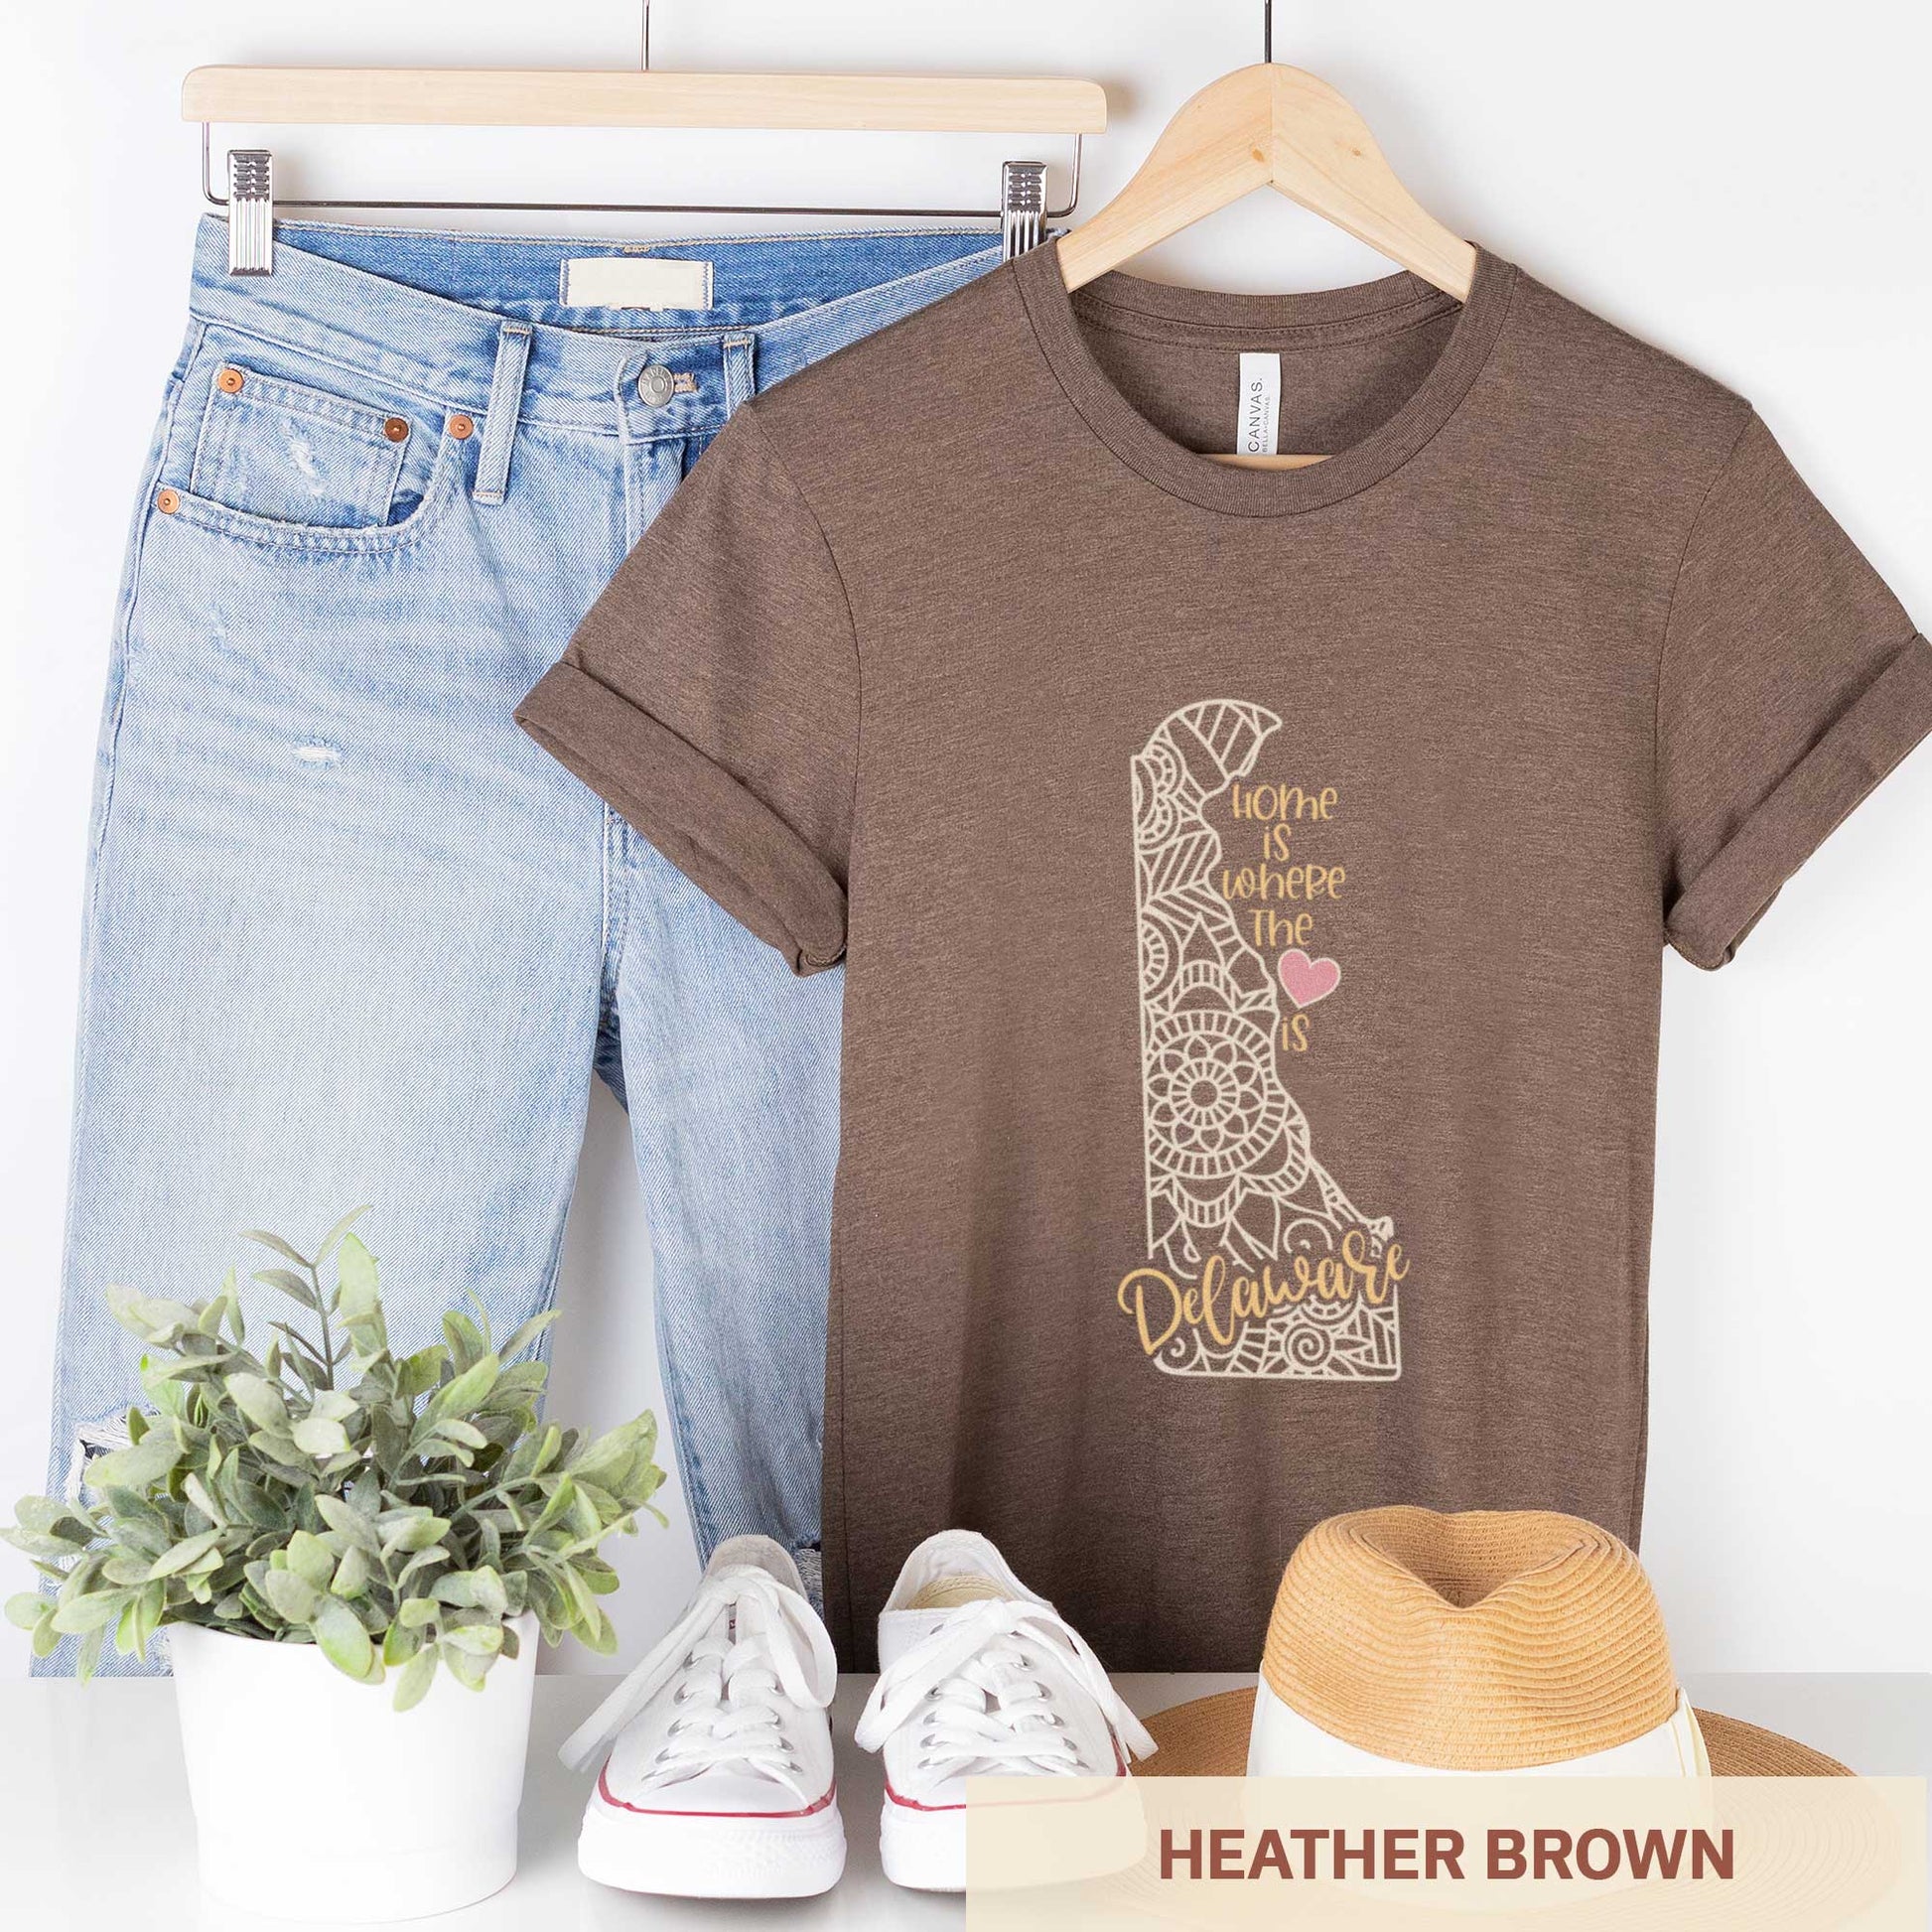 A hanging heather brown Bella Canvas t-shirt featuring a mandala in the shape of Delaware with the words home is where the heart is.